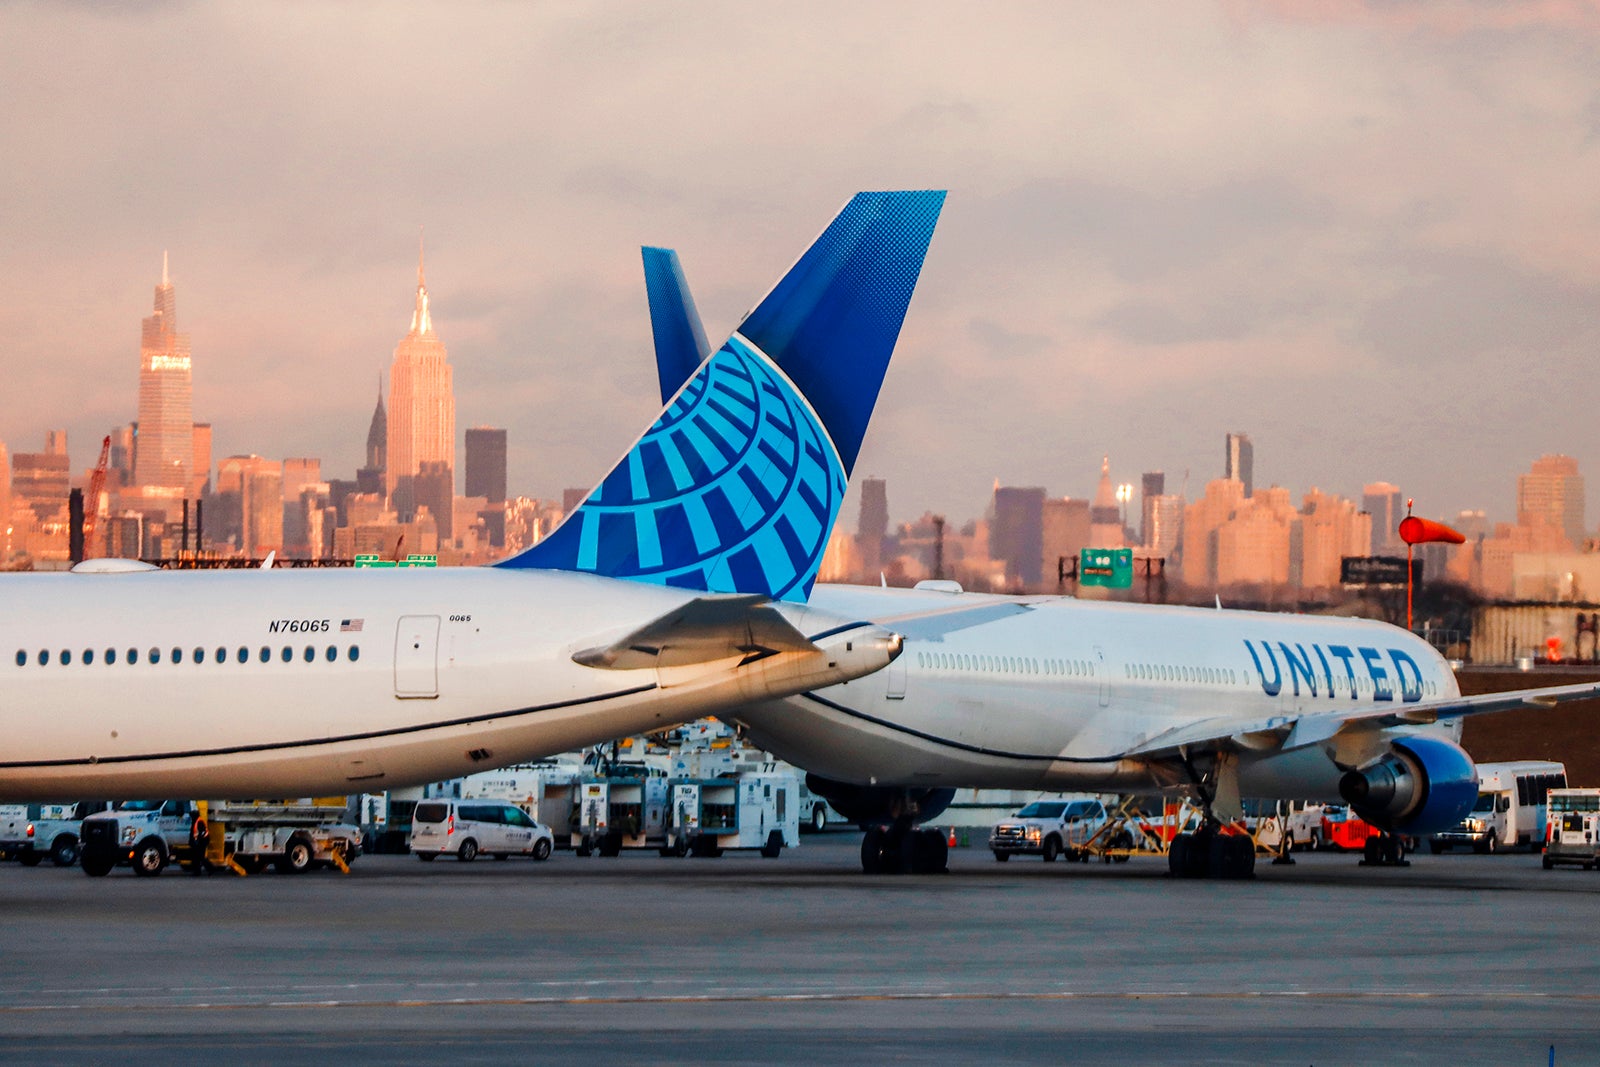 United Airlines Airplanes at Newark Liberty Airport in New Jersey